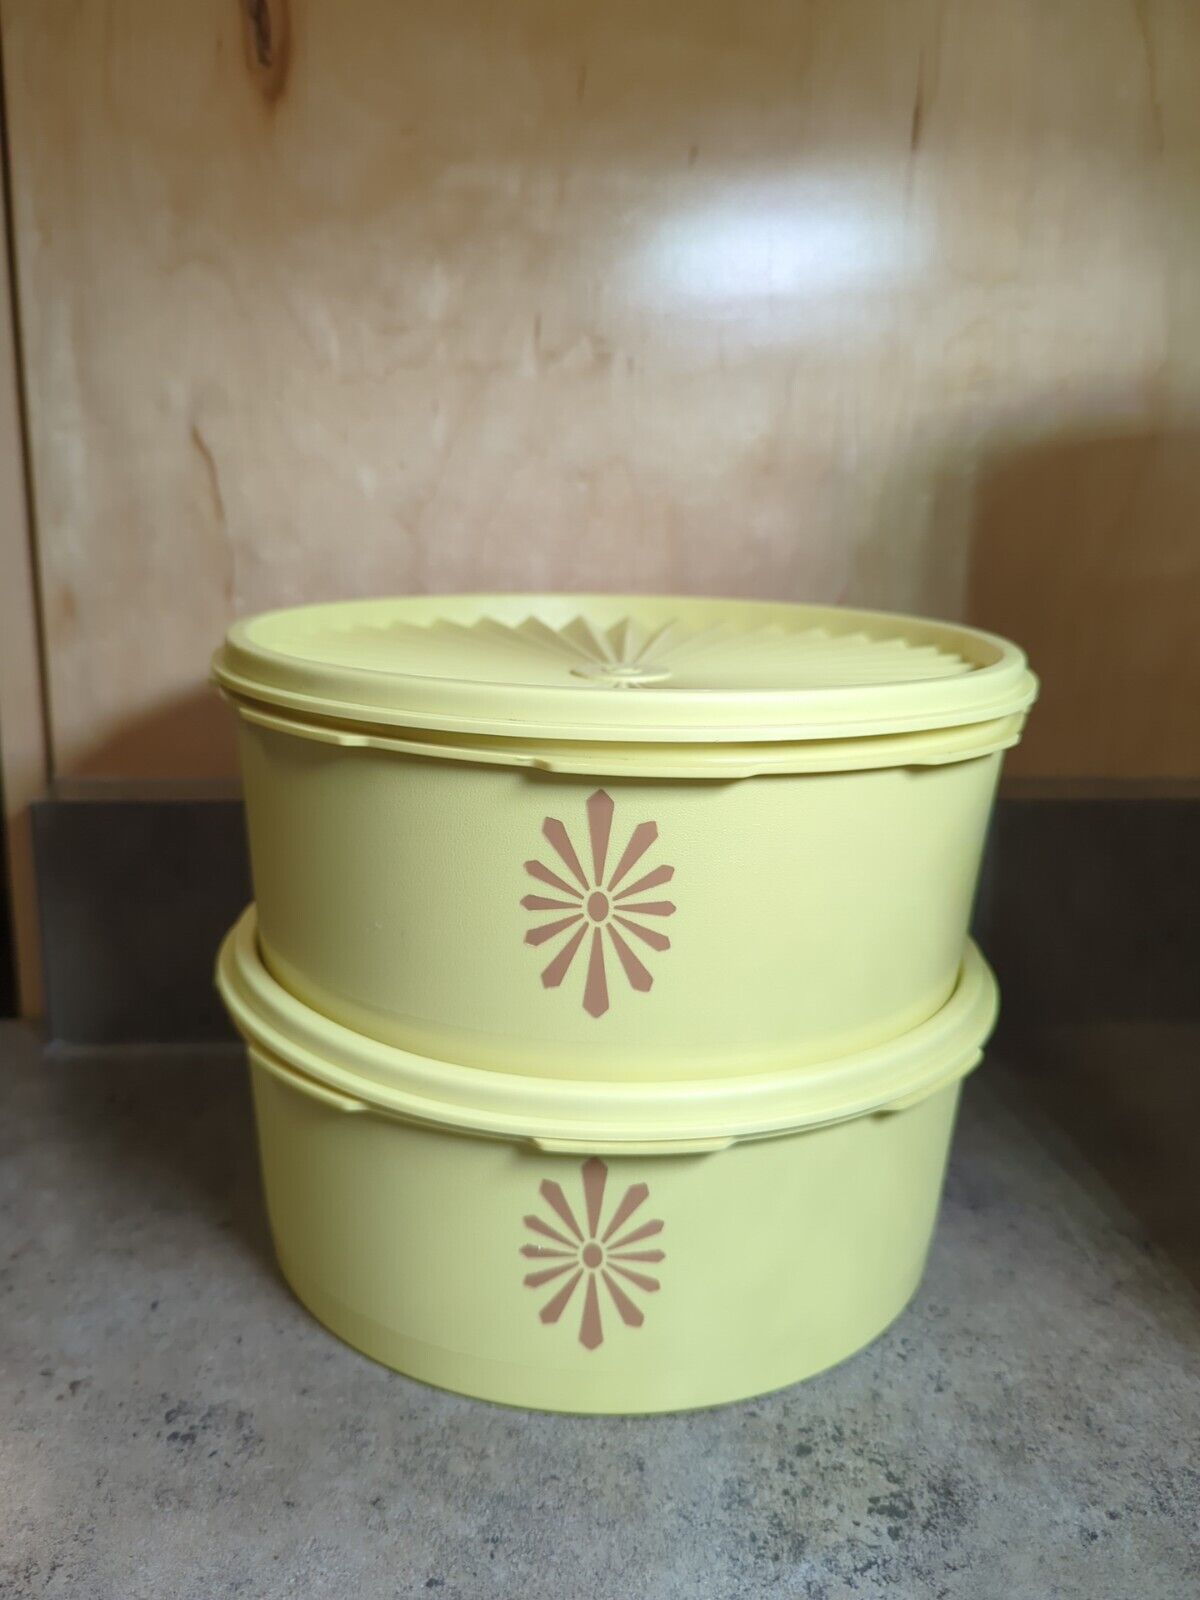 2 TUPPERWARE Harvest Gold SERVALIER Canisters with LIDs 1205-9, Vintage